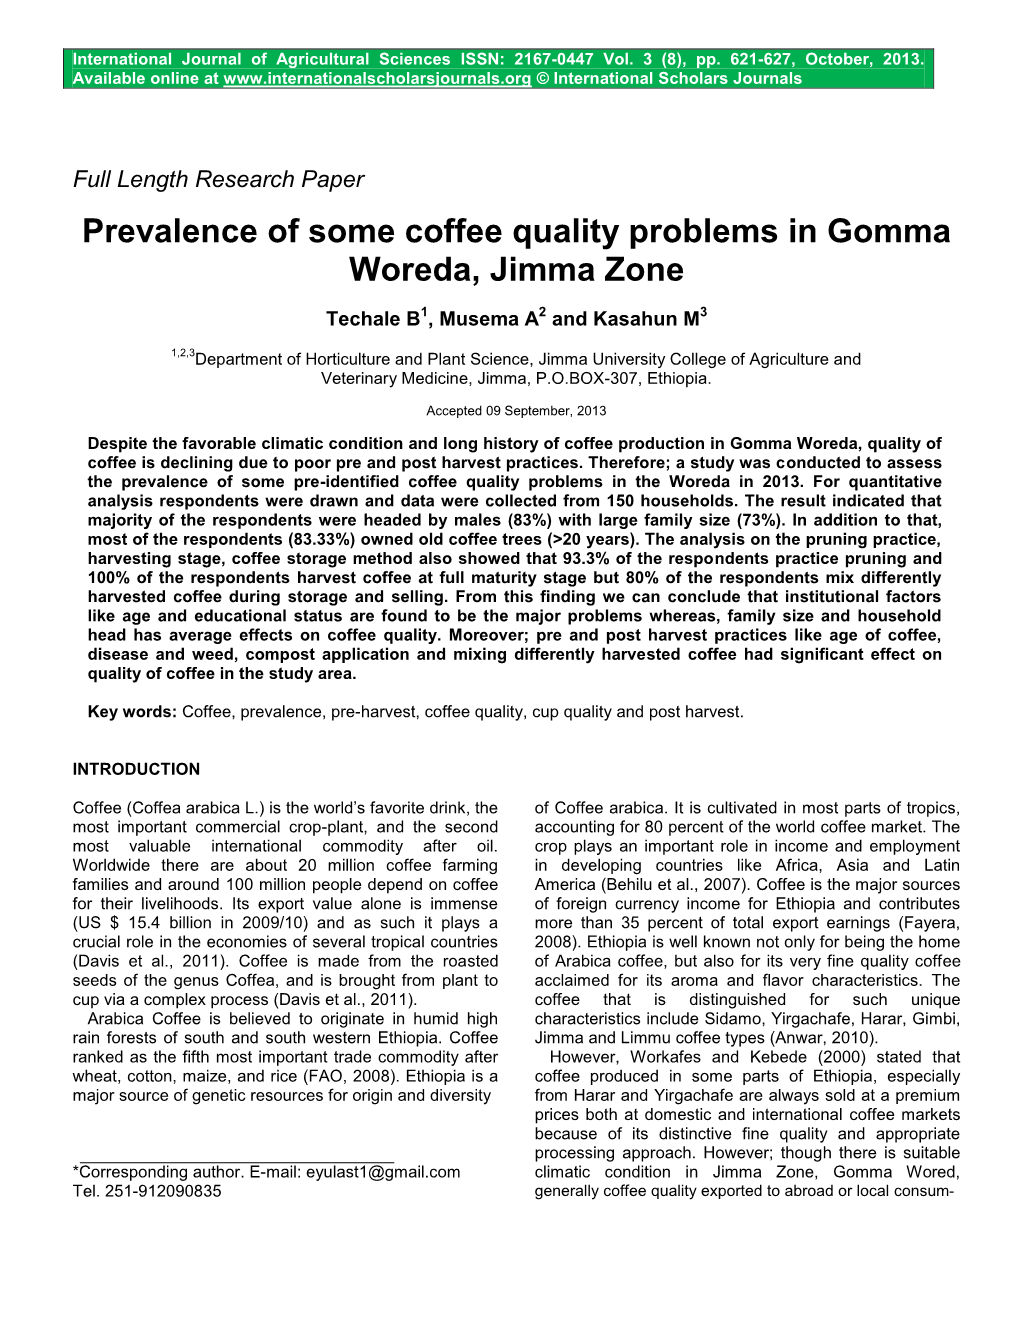 Prevalence of Some Coffee Quality Problems in Gomma Woreda, Jimma Zone